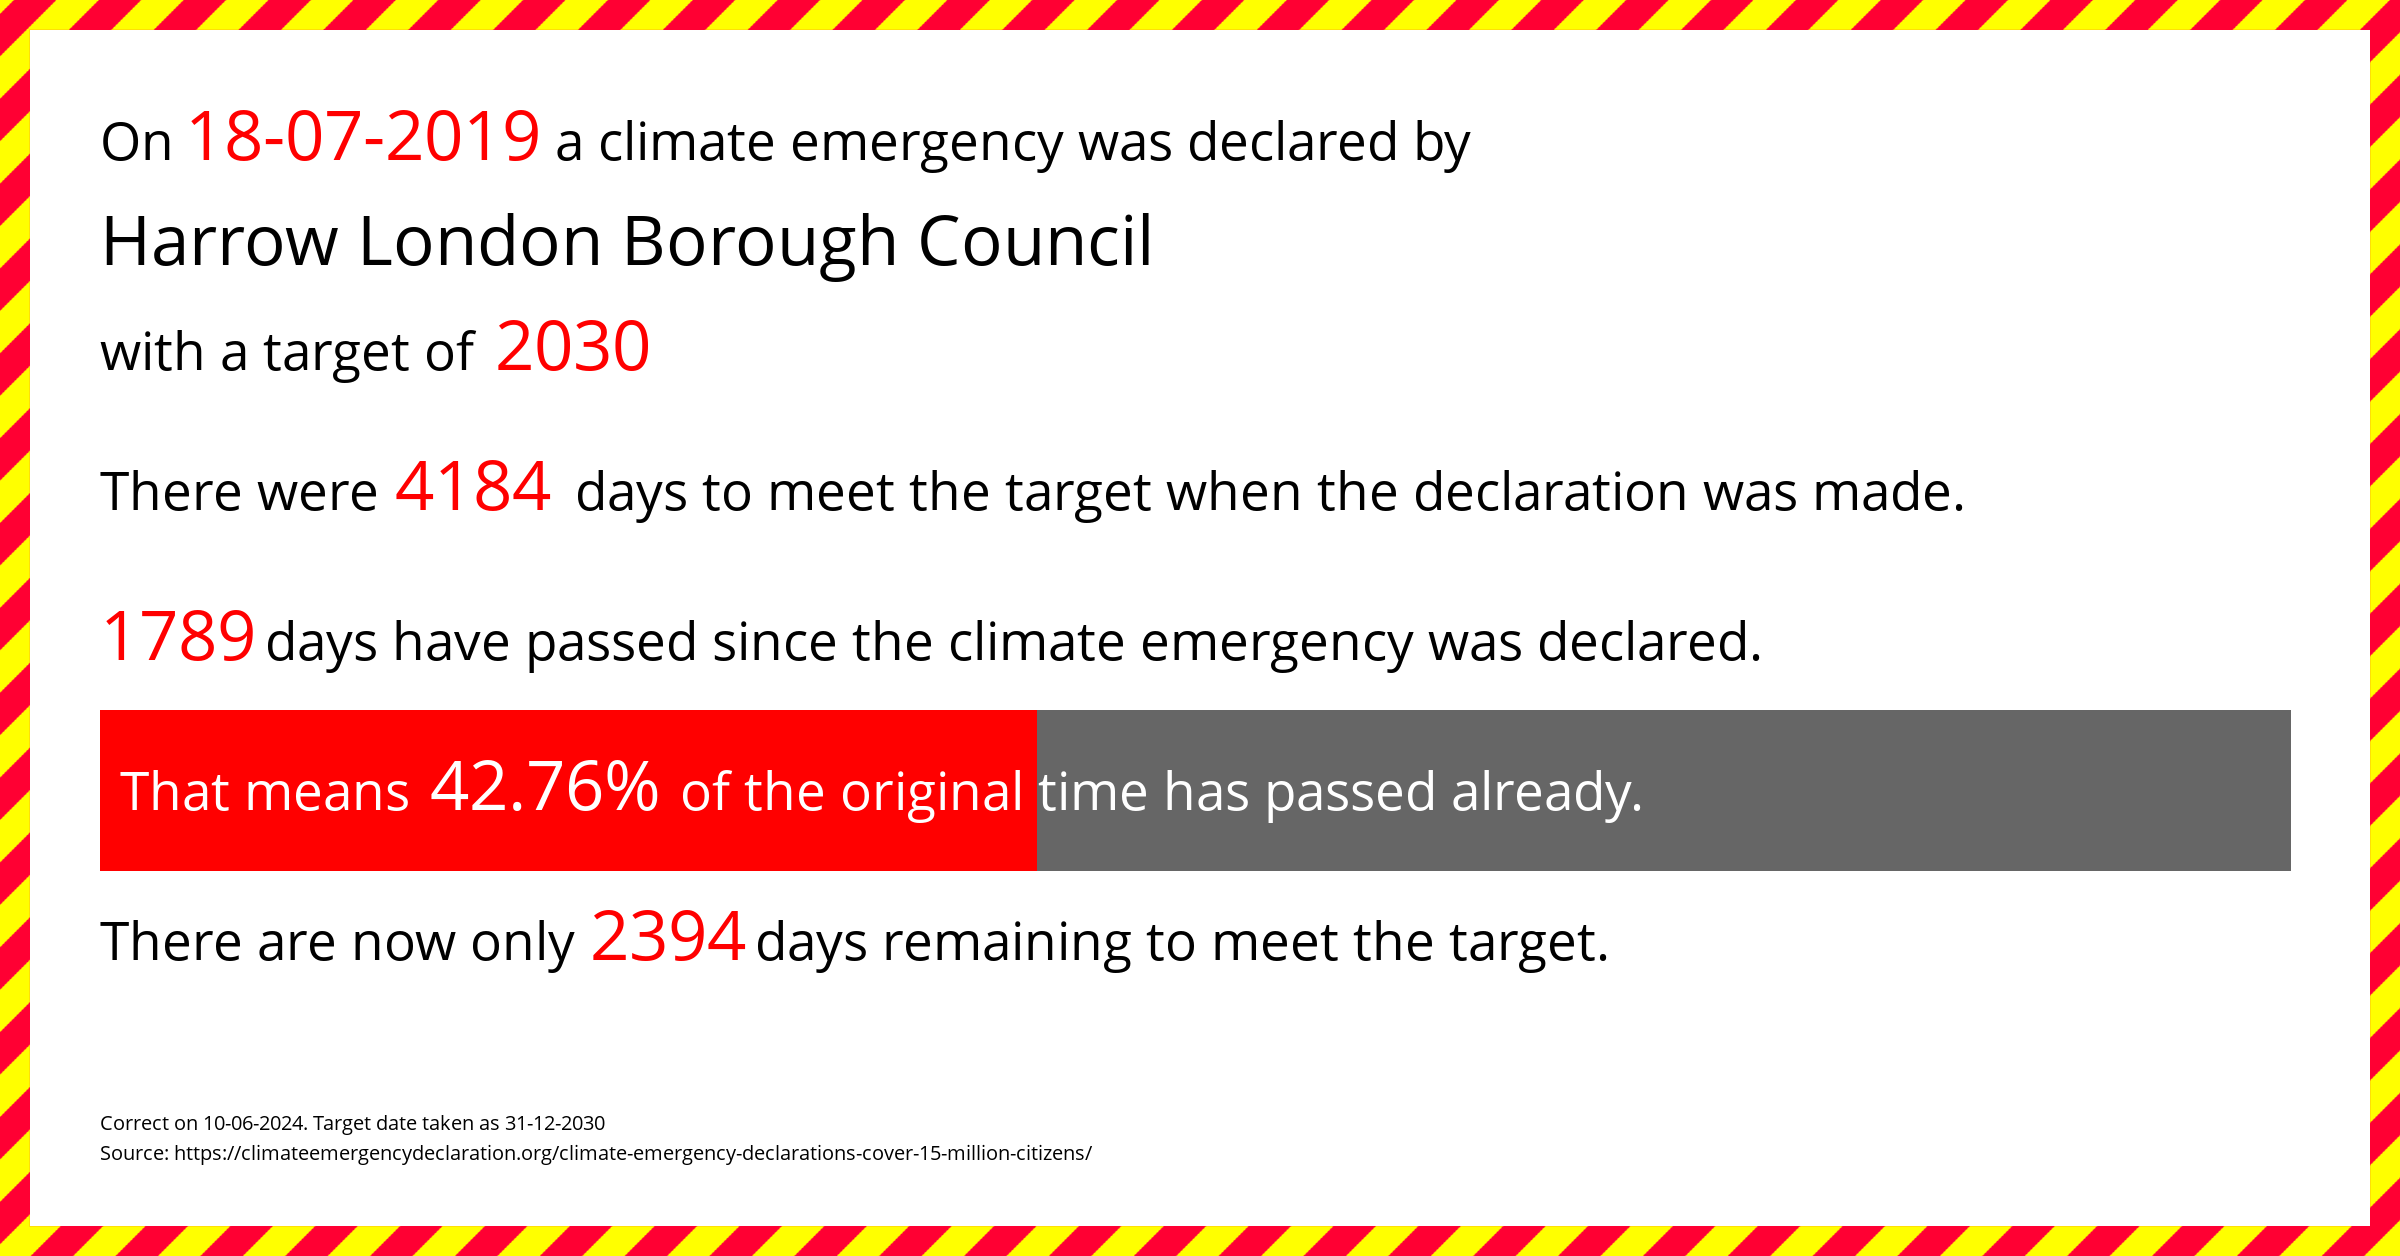 Harrow London Borough Council declared a Climate emergency on Thursday 18th July 2019, with a target of 2030.